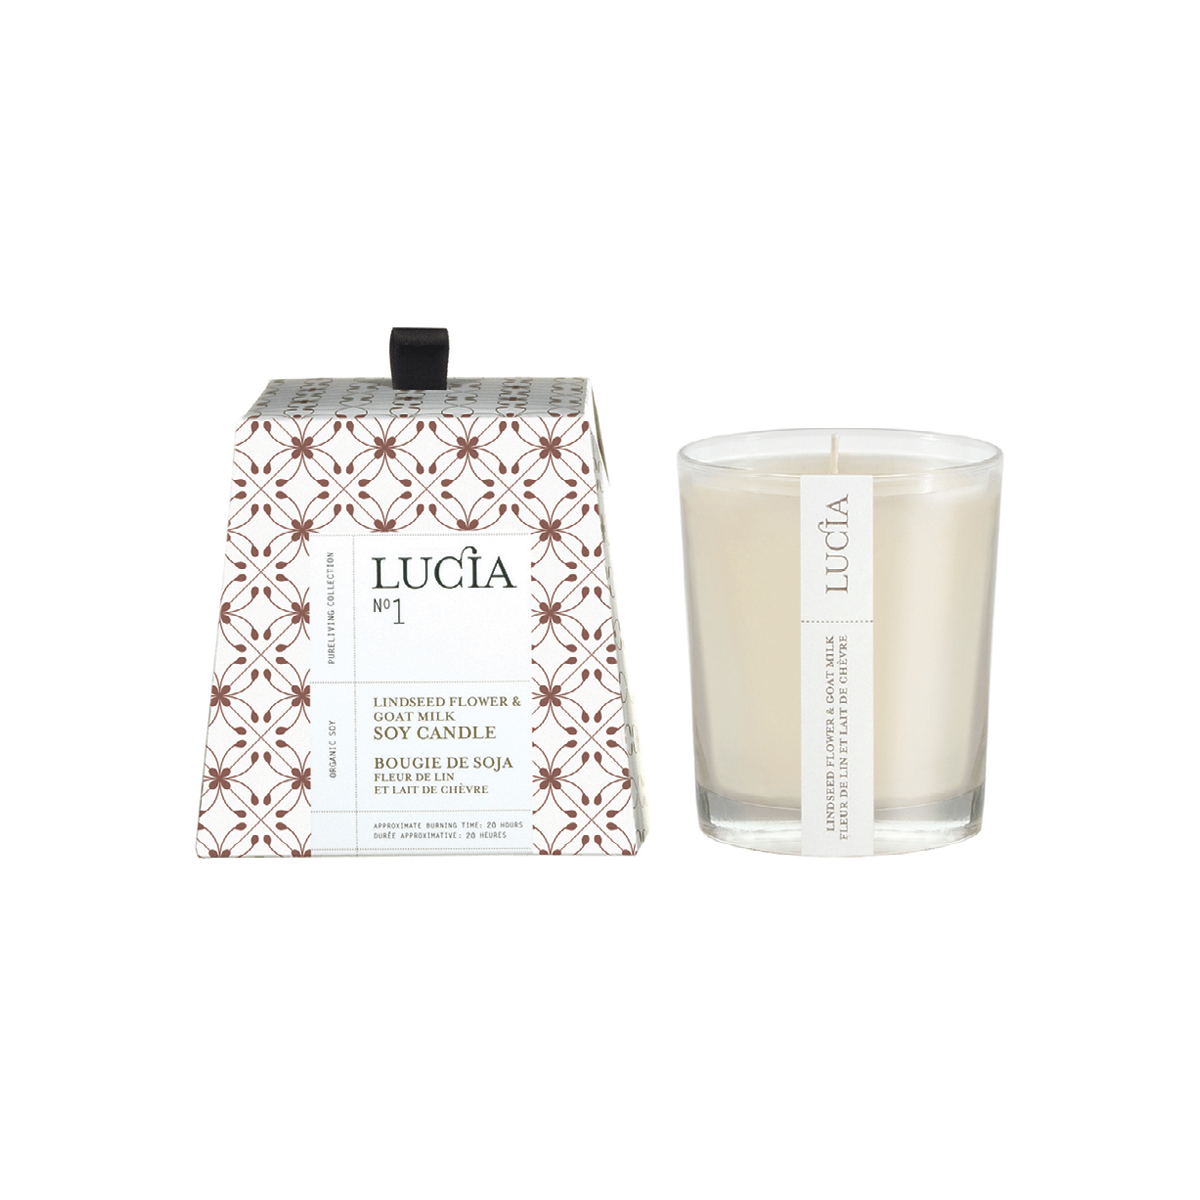 Lucia Scented Votive Candles